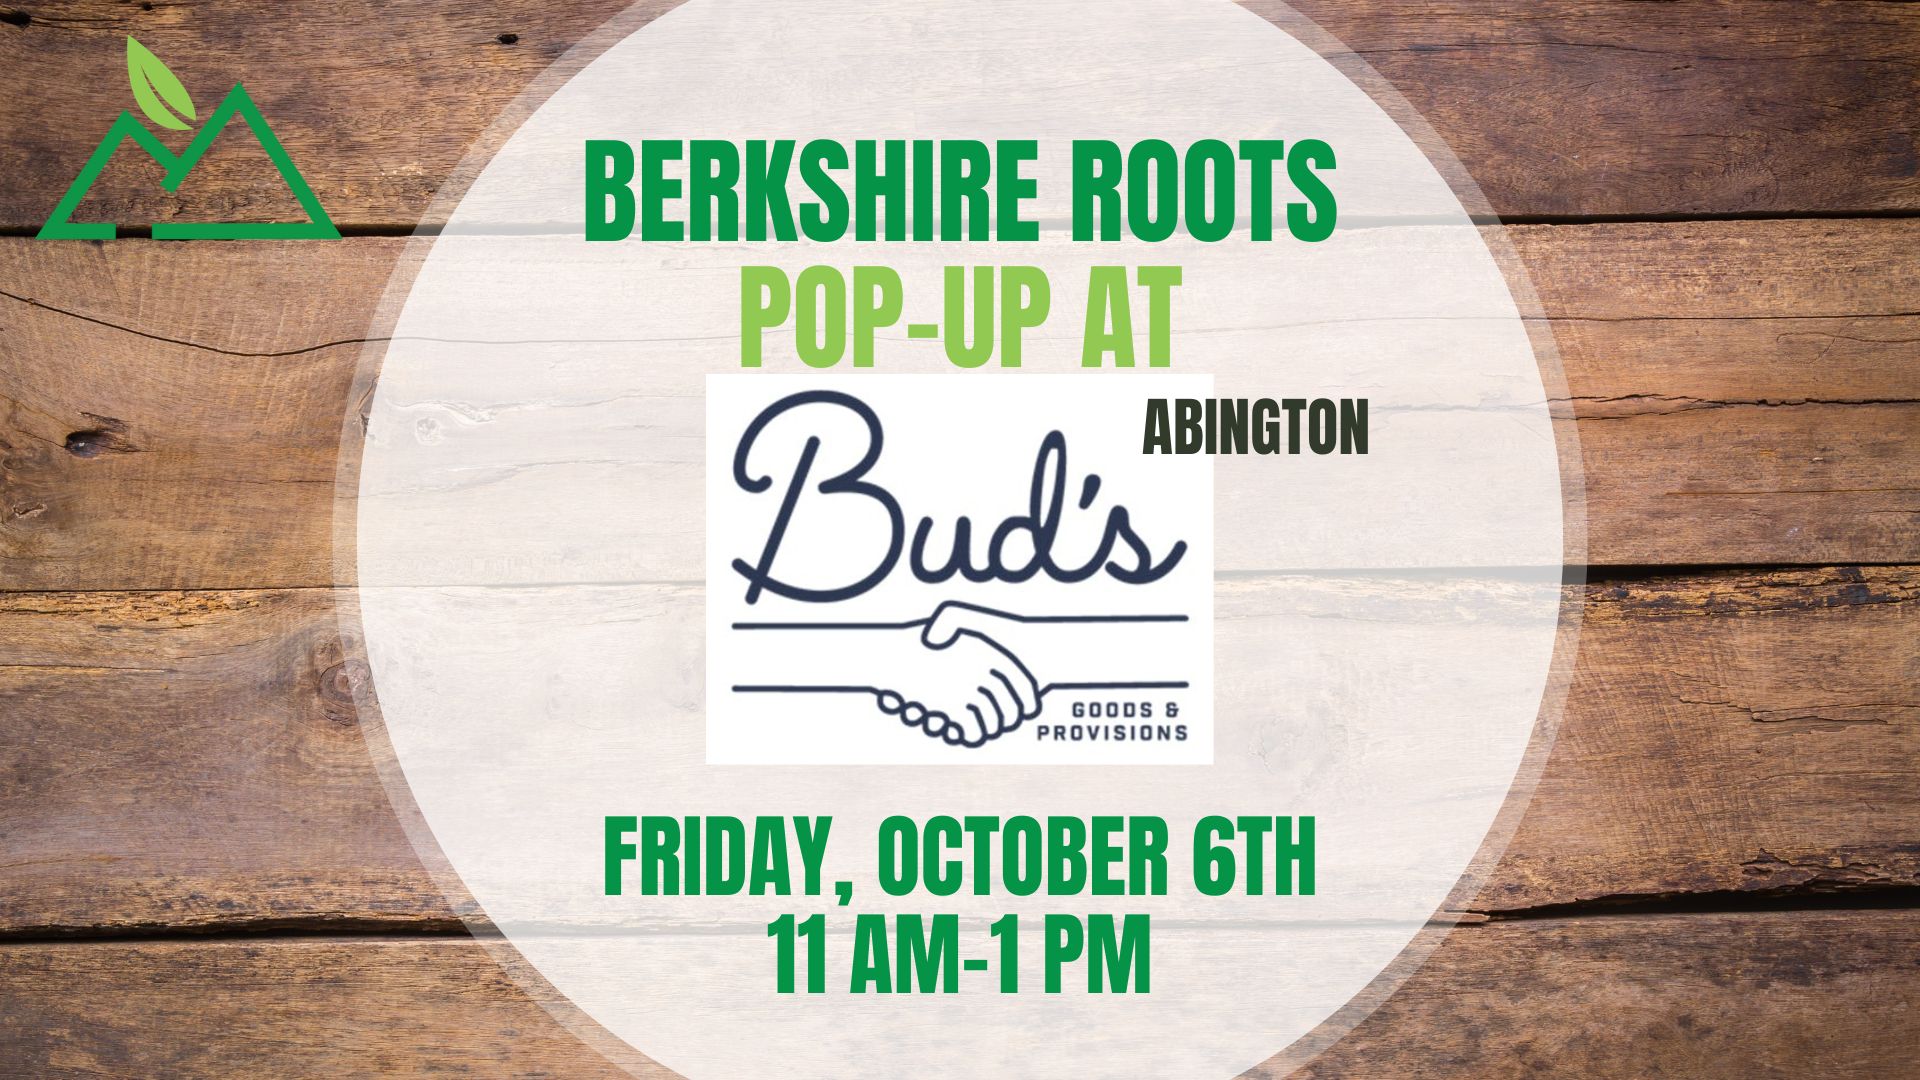 Berkshire Roots Pop Up at Bud's Goods